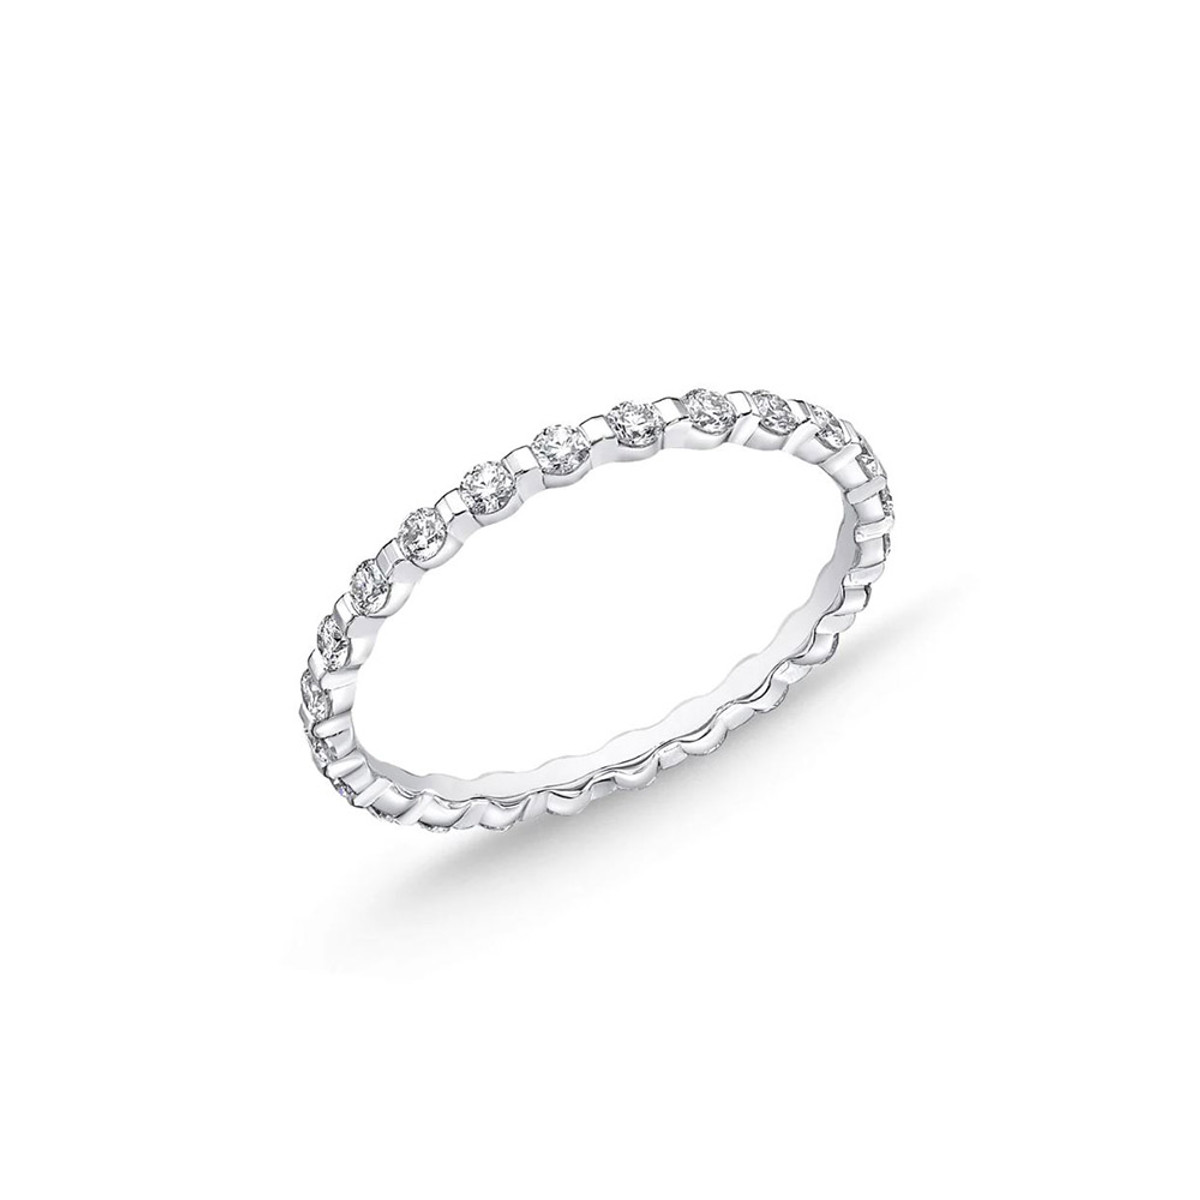 Hyde Park Collection 18K White Gold Diamond Eternity Band-42571